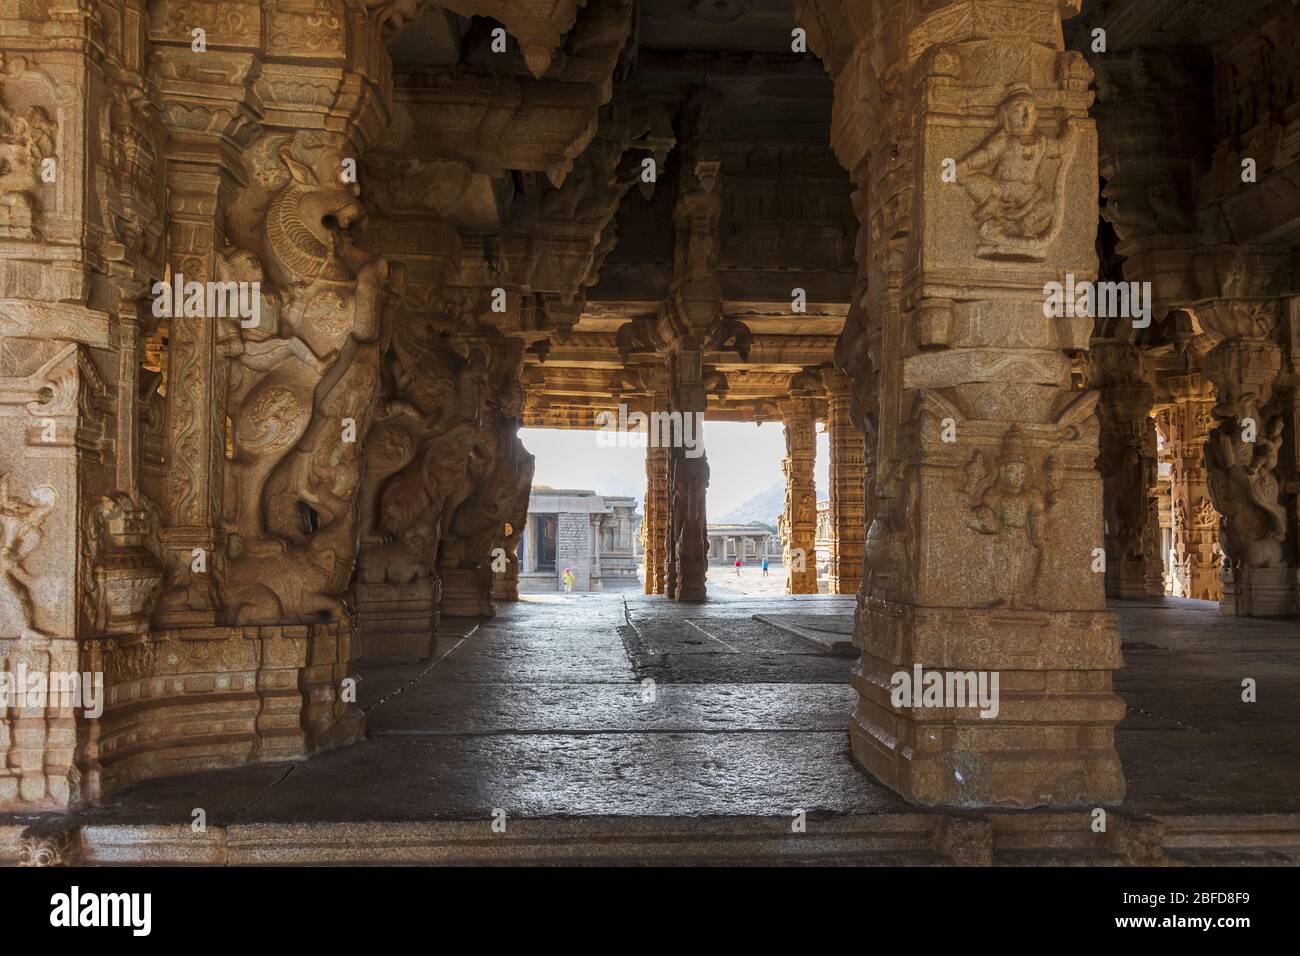 Ancient civilization in Hampi. India, State Karnataka. Old Hindu temples and ruins. The interior of the temple. Stock Photo